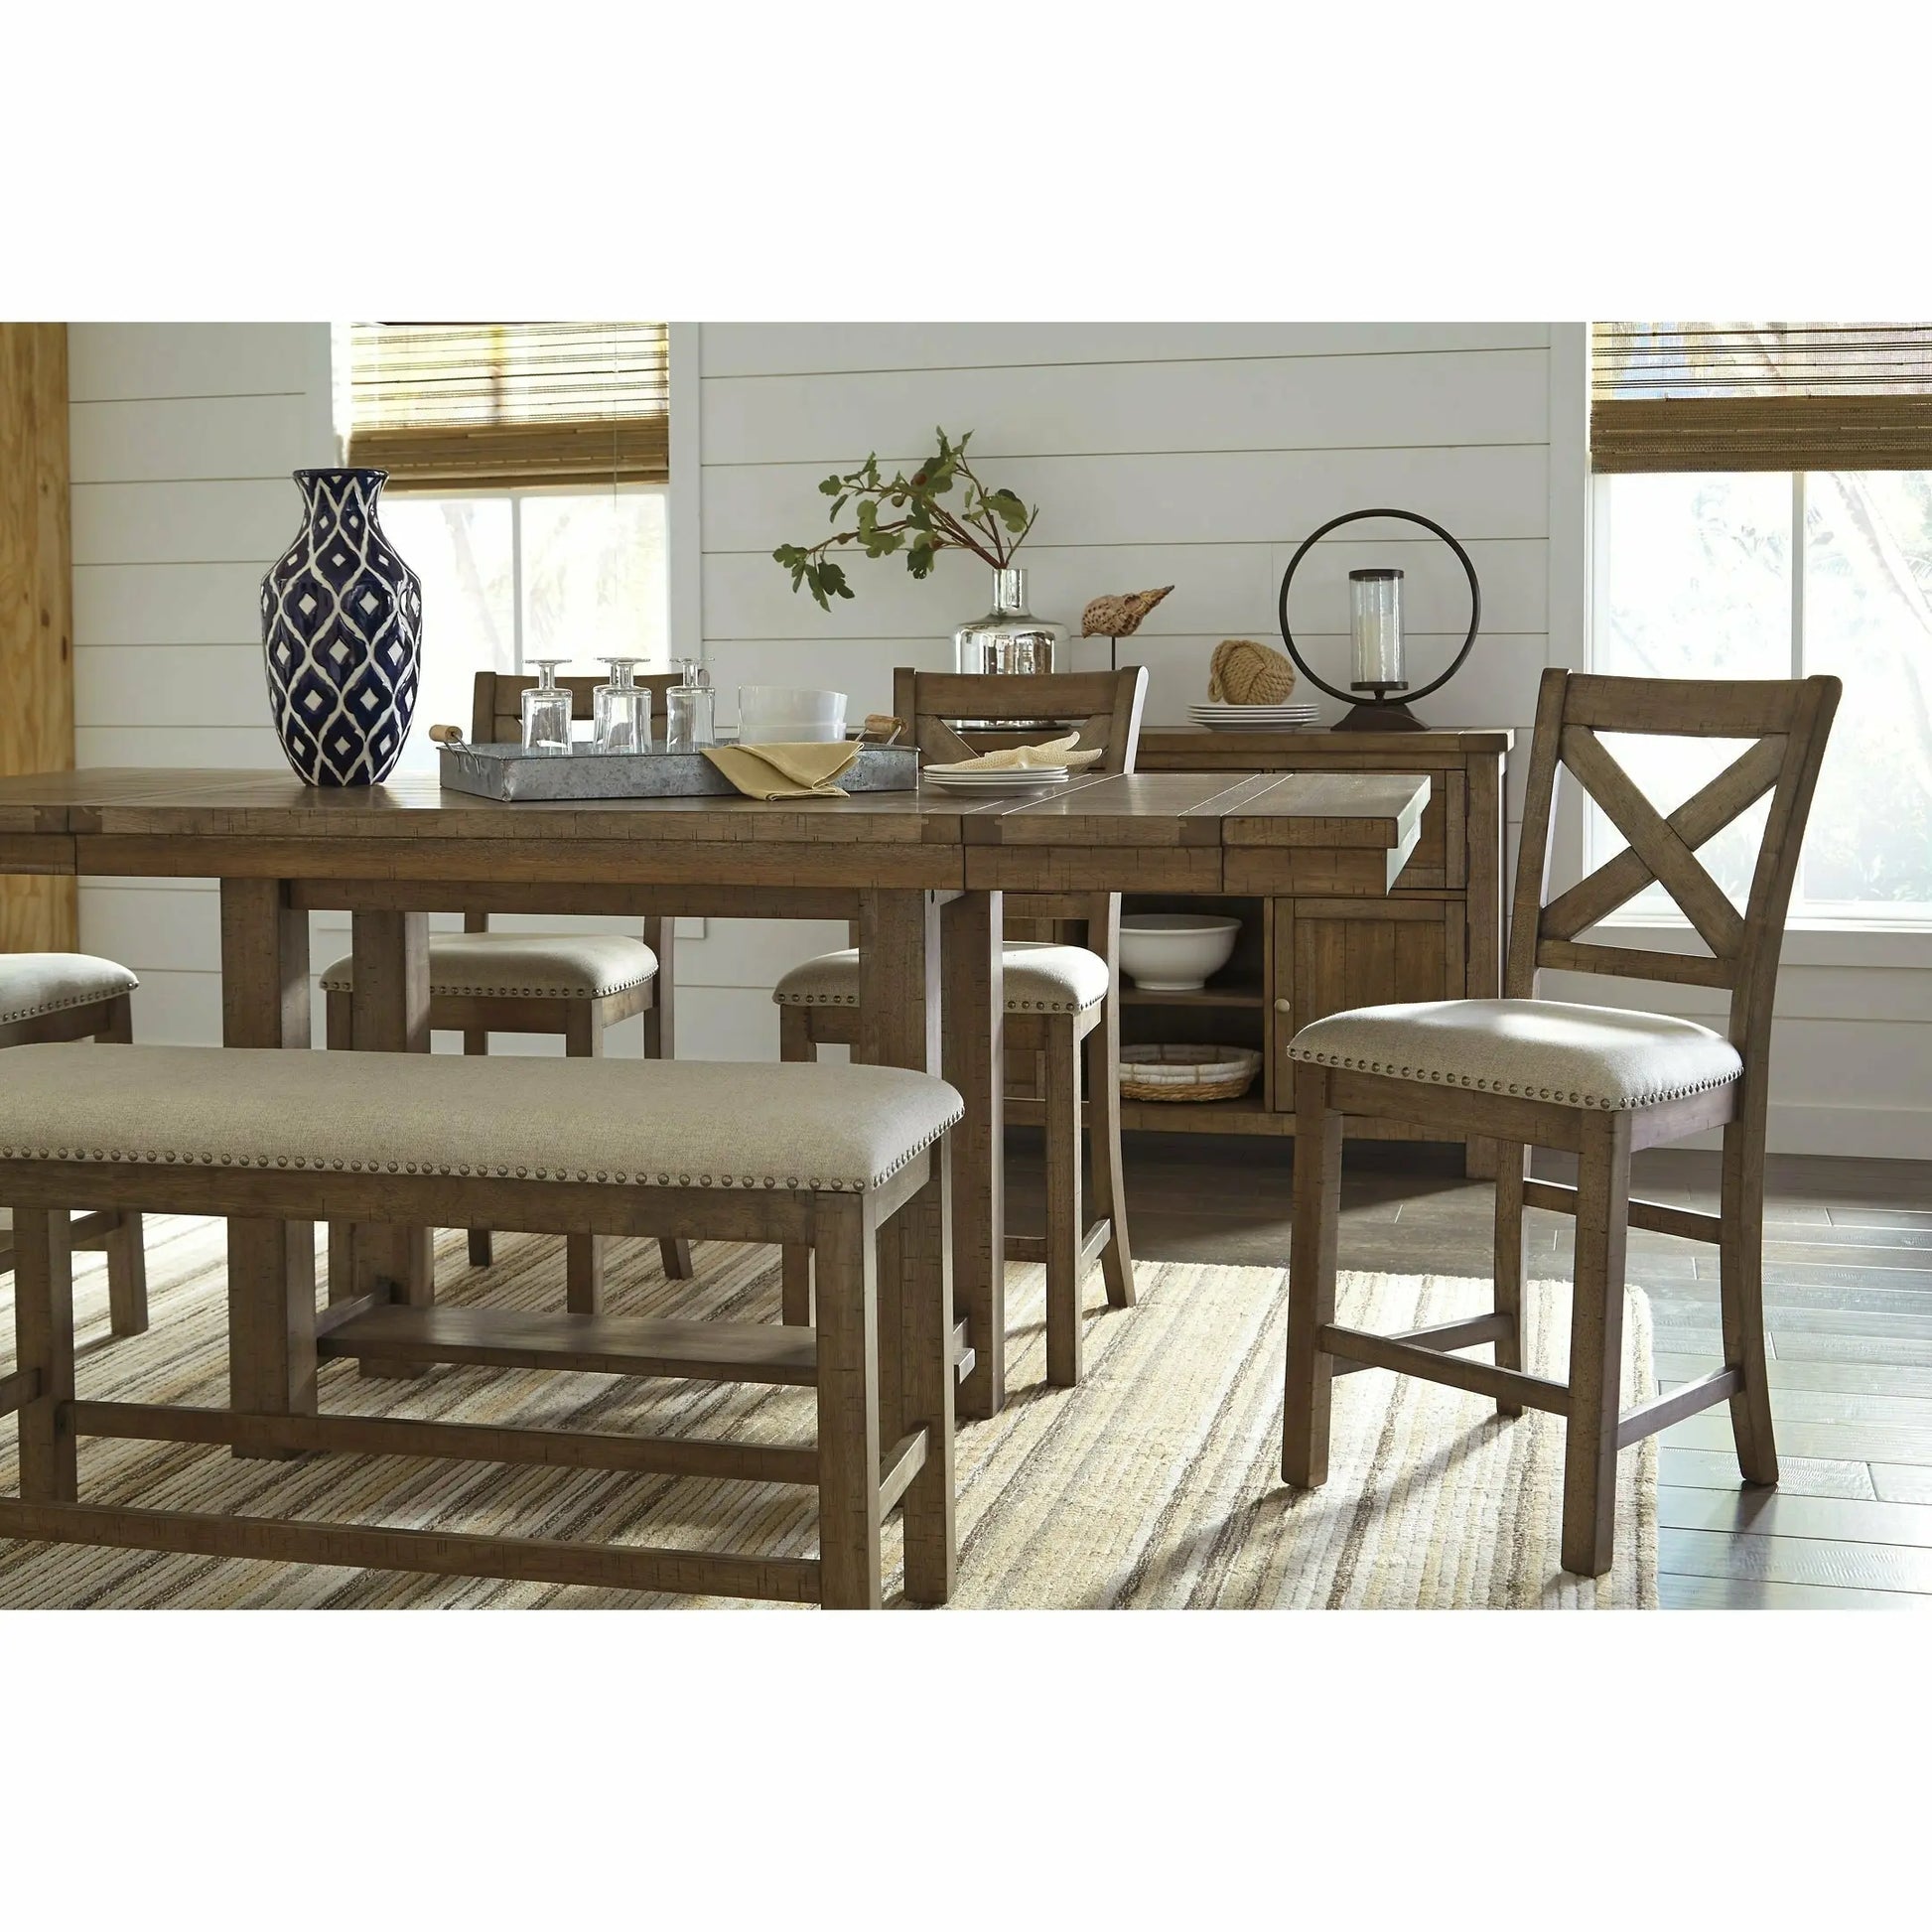 Moriville Double UPH Bench DINING ETC